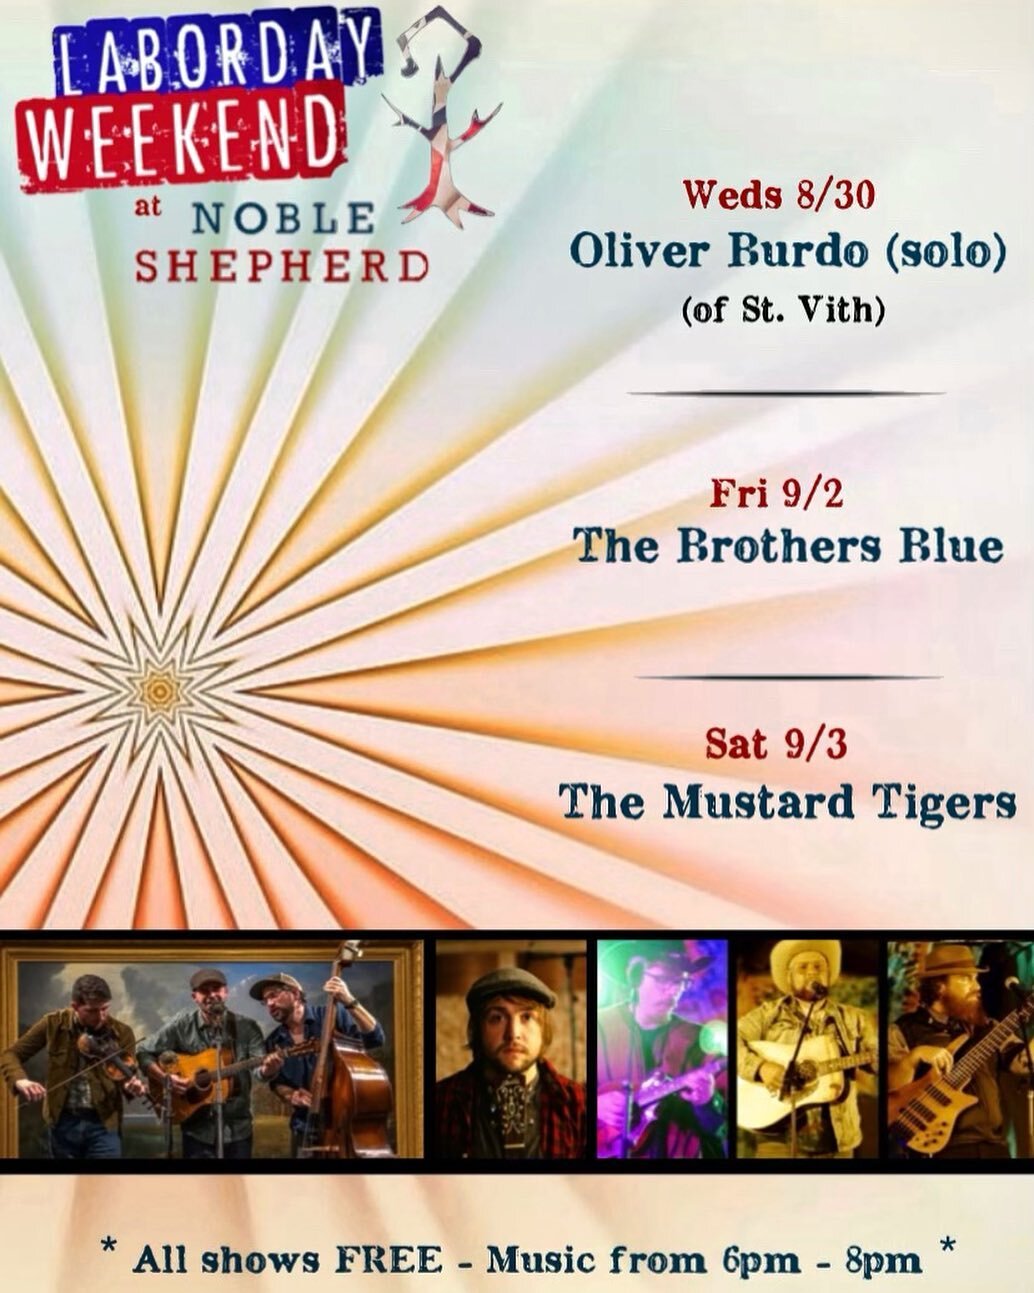 We have a great music lineup this week as we head into Labor Day weekend! We&rsquo;re pretty spoiled to have so many great musicians in our area. @benny.bleu @stvithband @mustardtigersmusic 

#bristolny #honeoyeny #explorehoneoye #supportyourlocalmus